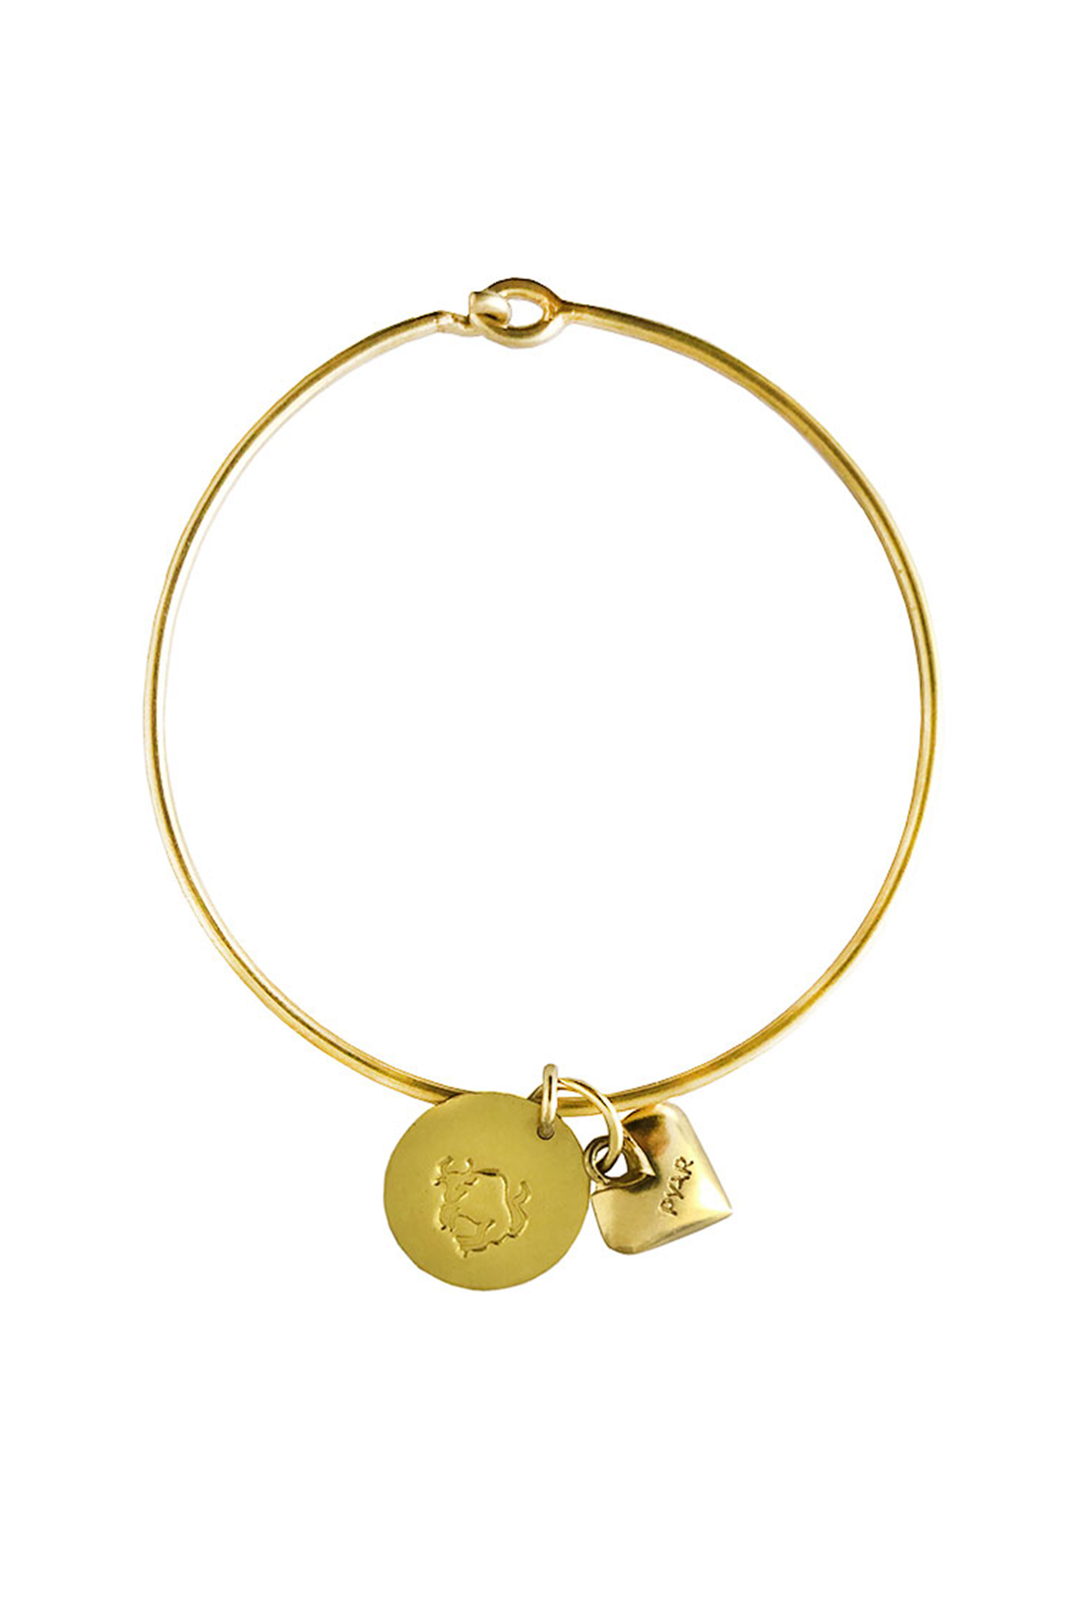 Women's zodiac bracelet by Pyar, available on ZERRIN with free Singapore shipping 